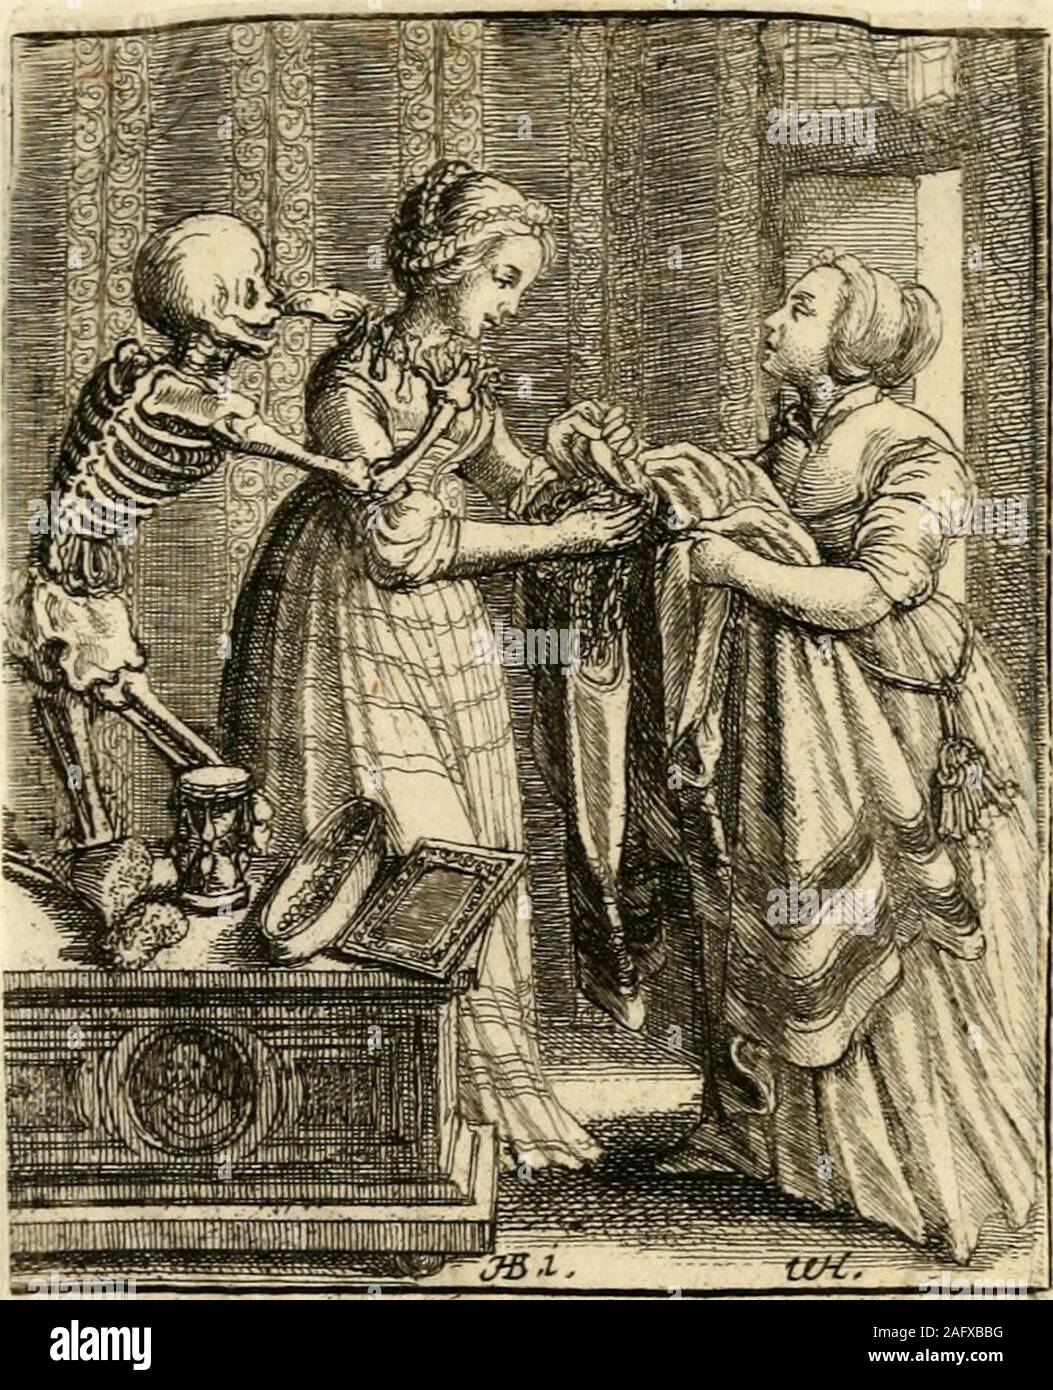 . The dance of death. Me cV tc fola^m-or^ fepsuraLit .^. X)v^Ci^eatinhottis ekes- Cuos Sc ixl 63 THE YOUNG MAIDEN. XXII. THE lady is exhibited in her dressing-room with her maid, who is bringing her asplendid robe, with a chain necklace of gold.Upon a chest are seen a looking-glass, asponge, a brush, and a box of paint. Deathbehind, ornaments the girl with a necklaceof bones. 64 THE MERCHANT. xxm. AFTER having escaped the perils of thesea and happily reached the wished-for shore,with his bales of merchandize, this too secureadventurer, whilst contemplating his riches,is surprized by his unwelc Stock Photo